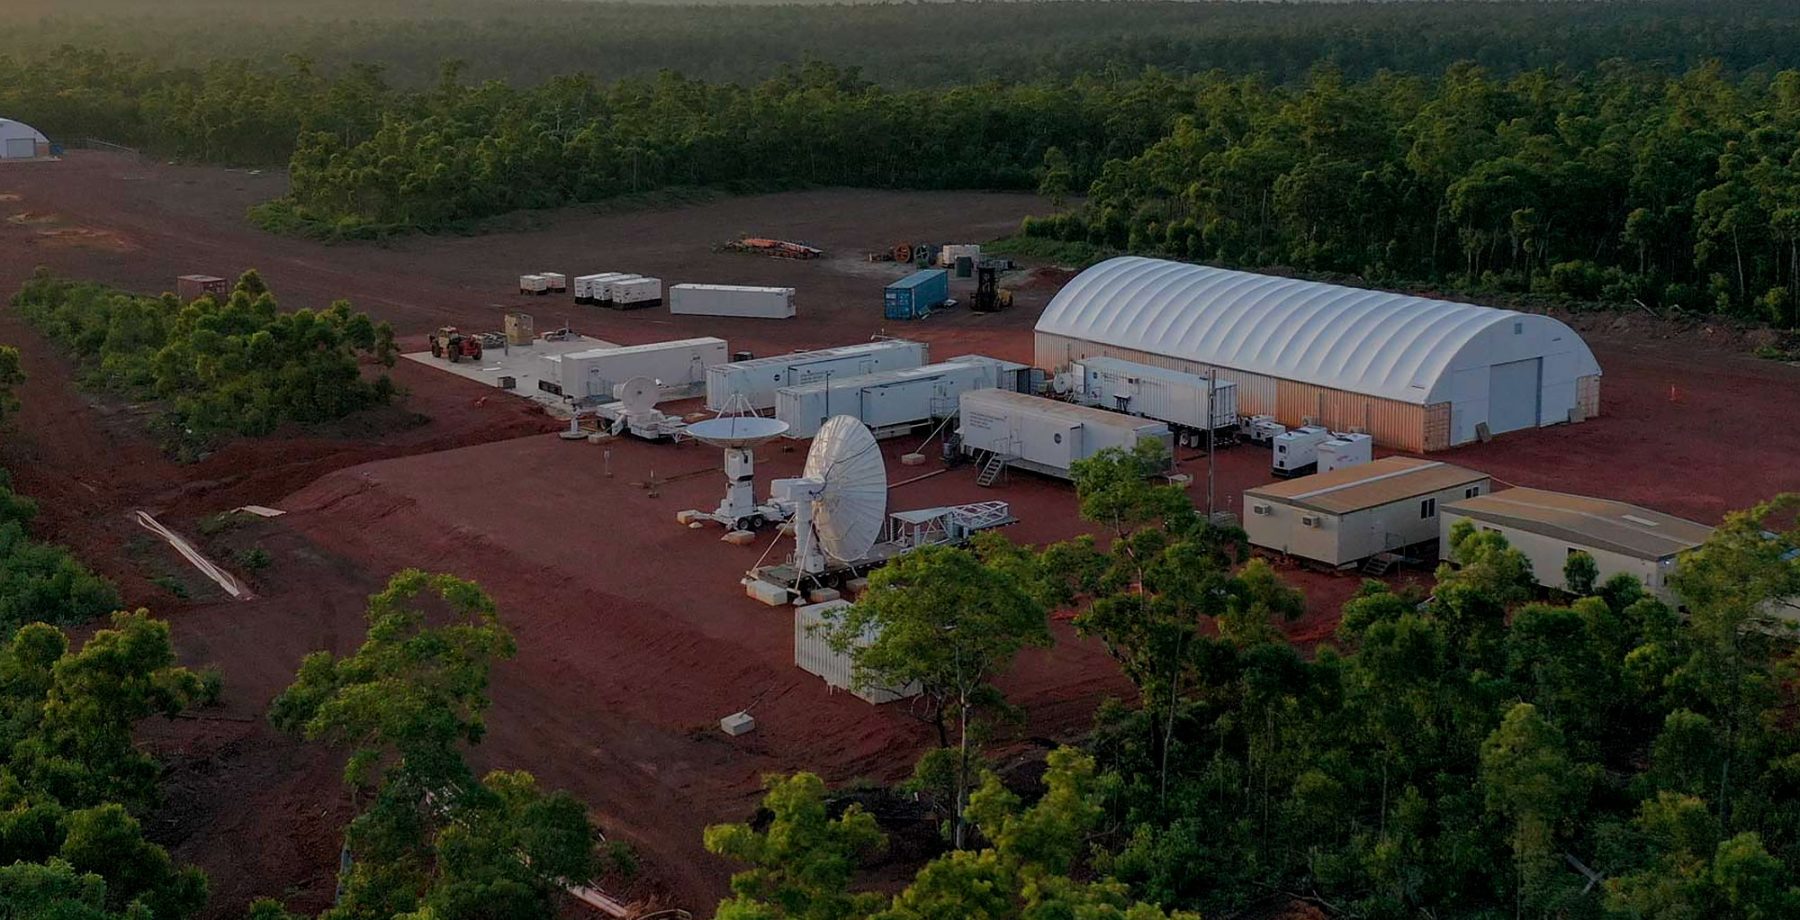 Drone captured photo over a remote site with Container Dome Fabric Structures